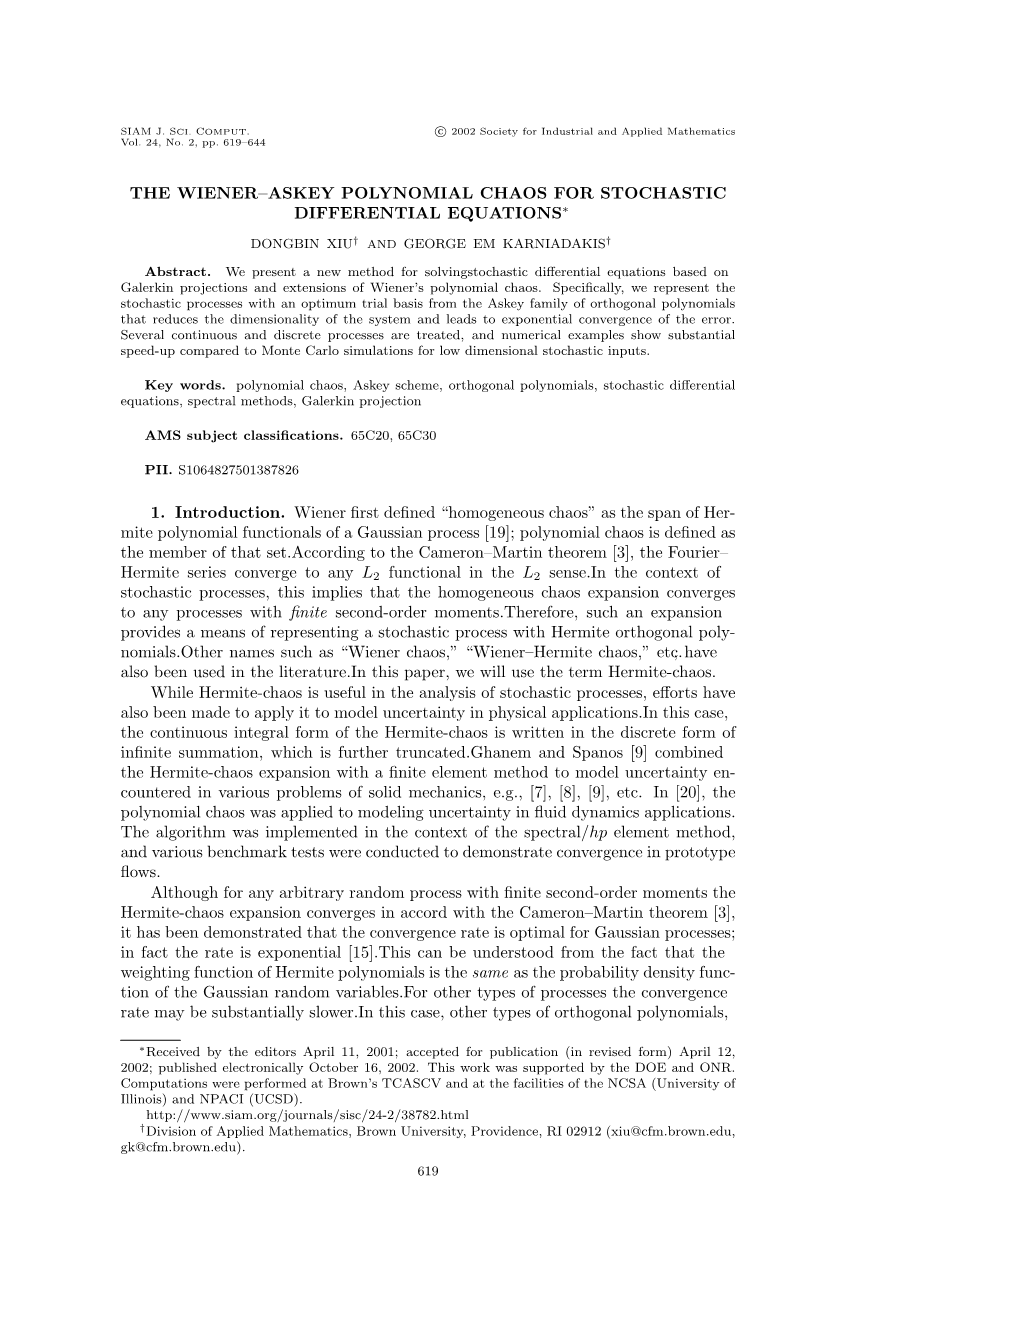 The Wiener-Askey Polynomial Chaos for Stochastic Differential Equations